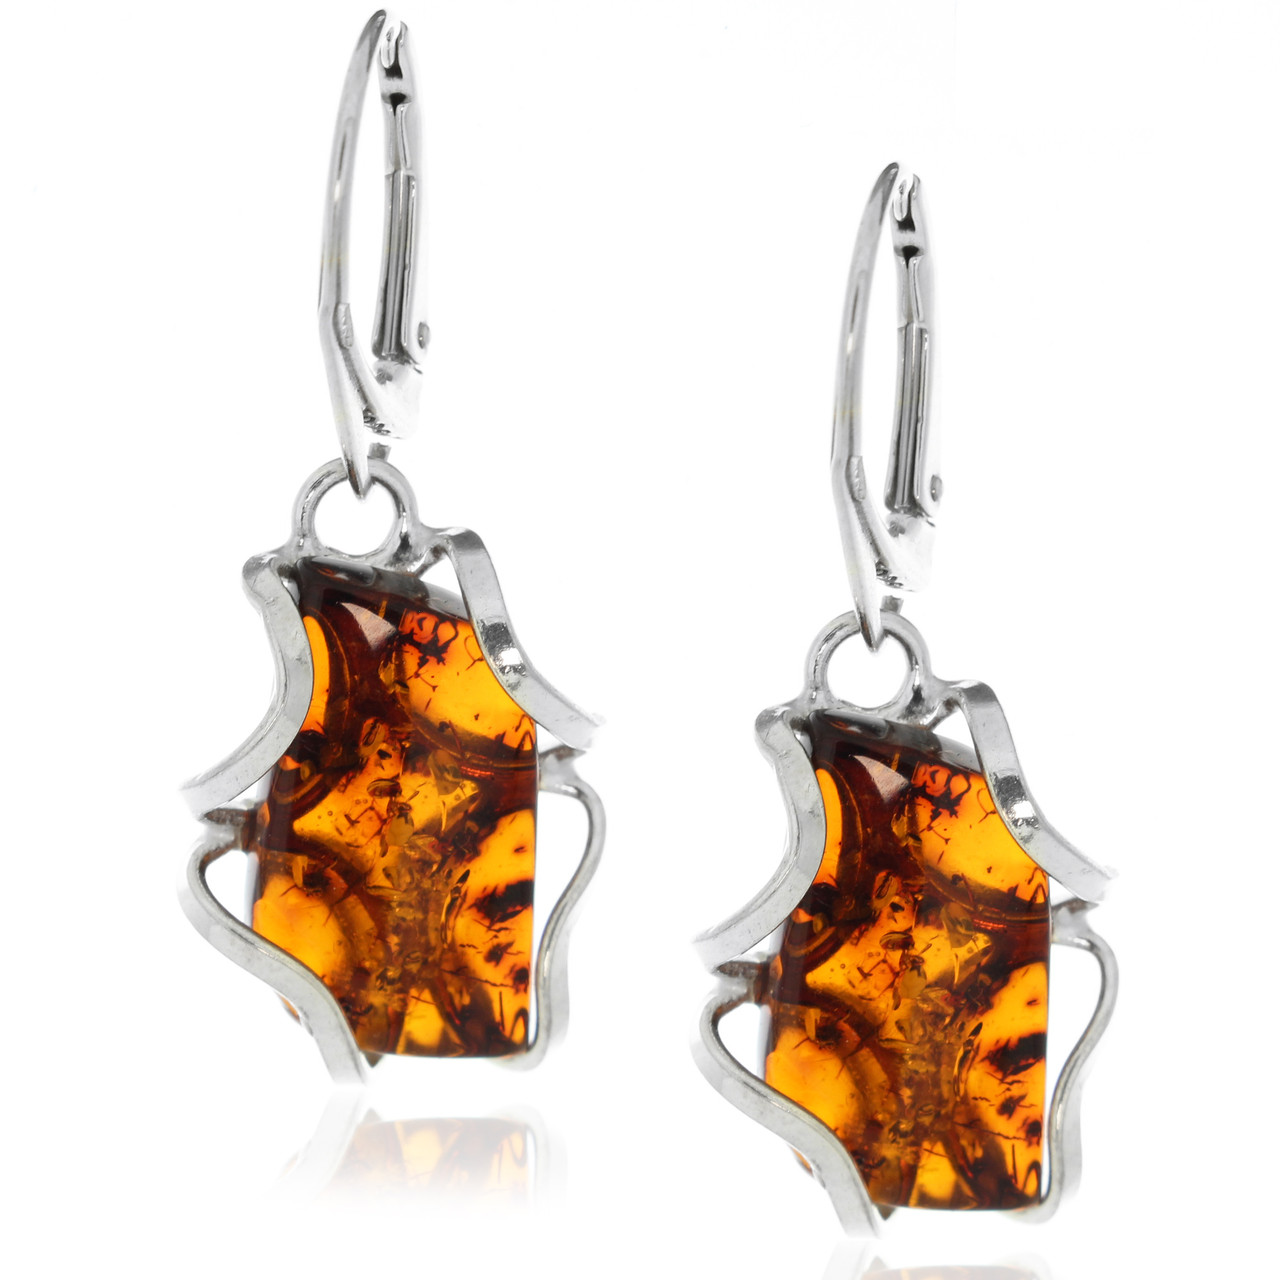 Details about   Handmade Amber sterling silver chandelier earrings 